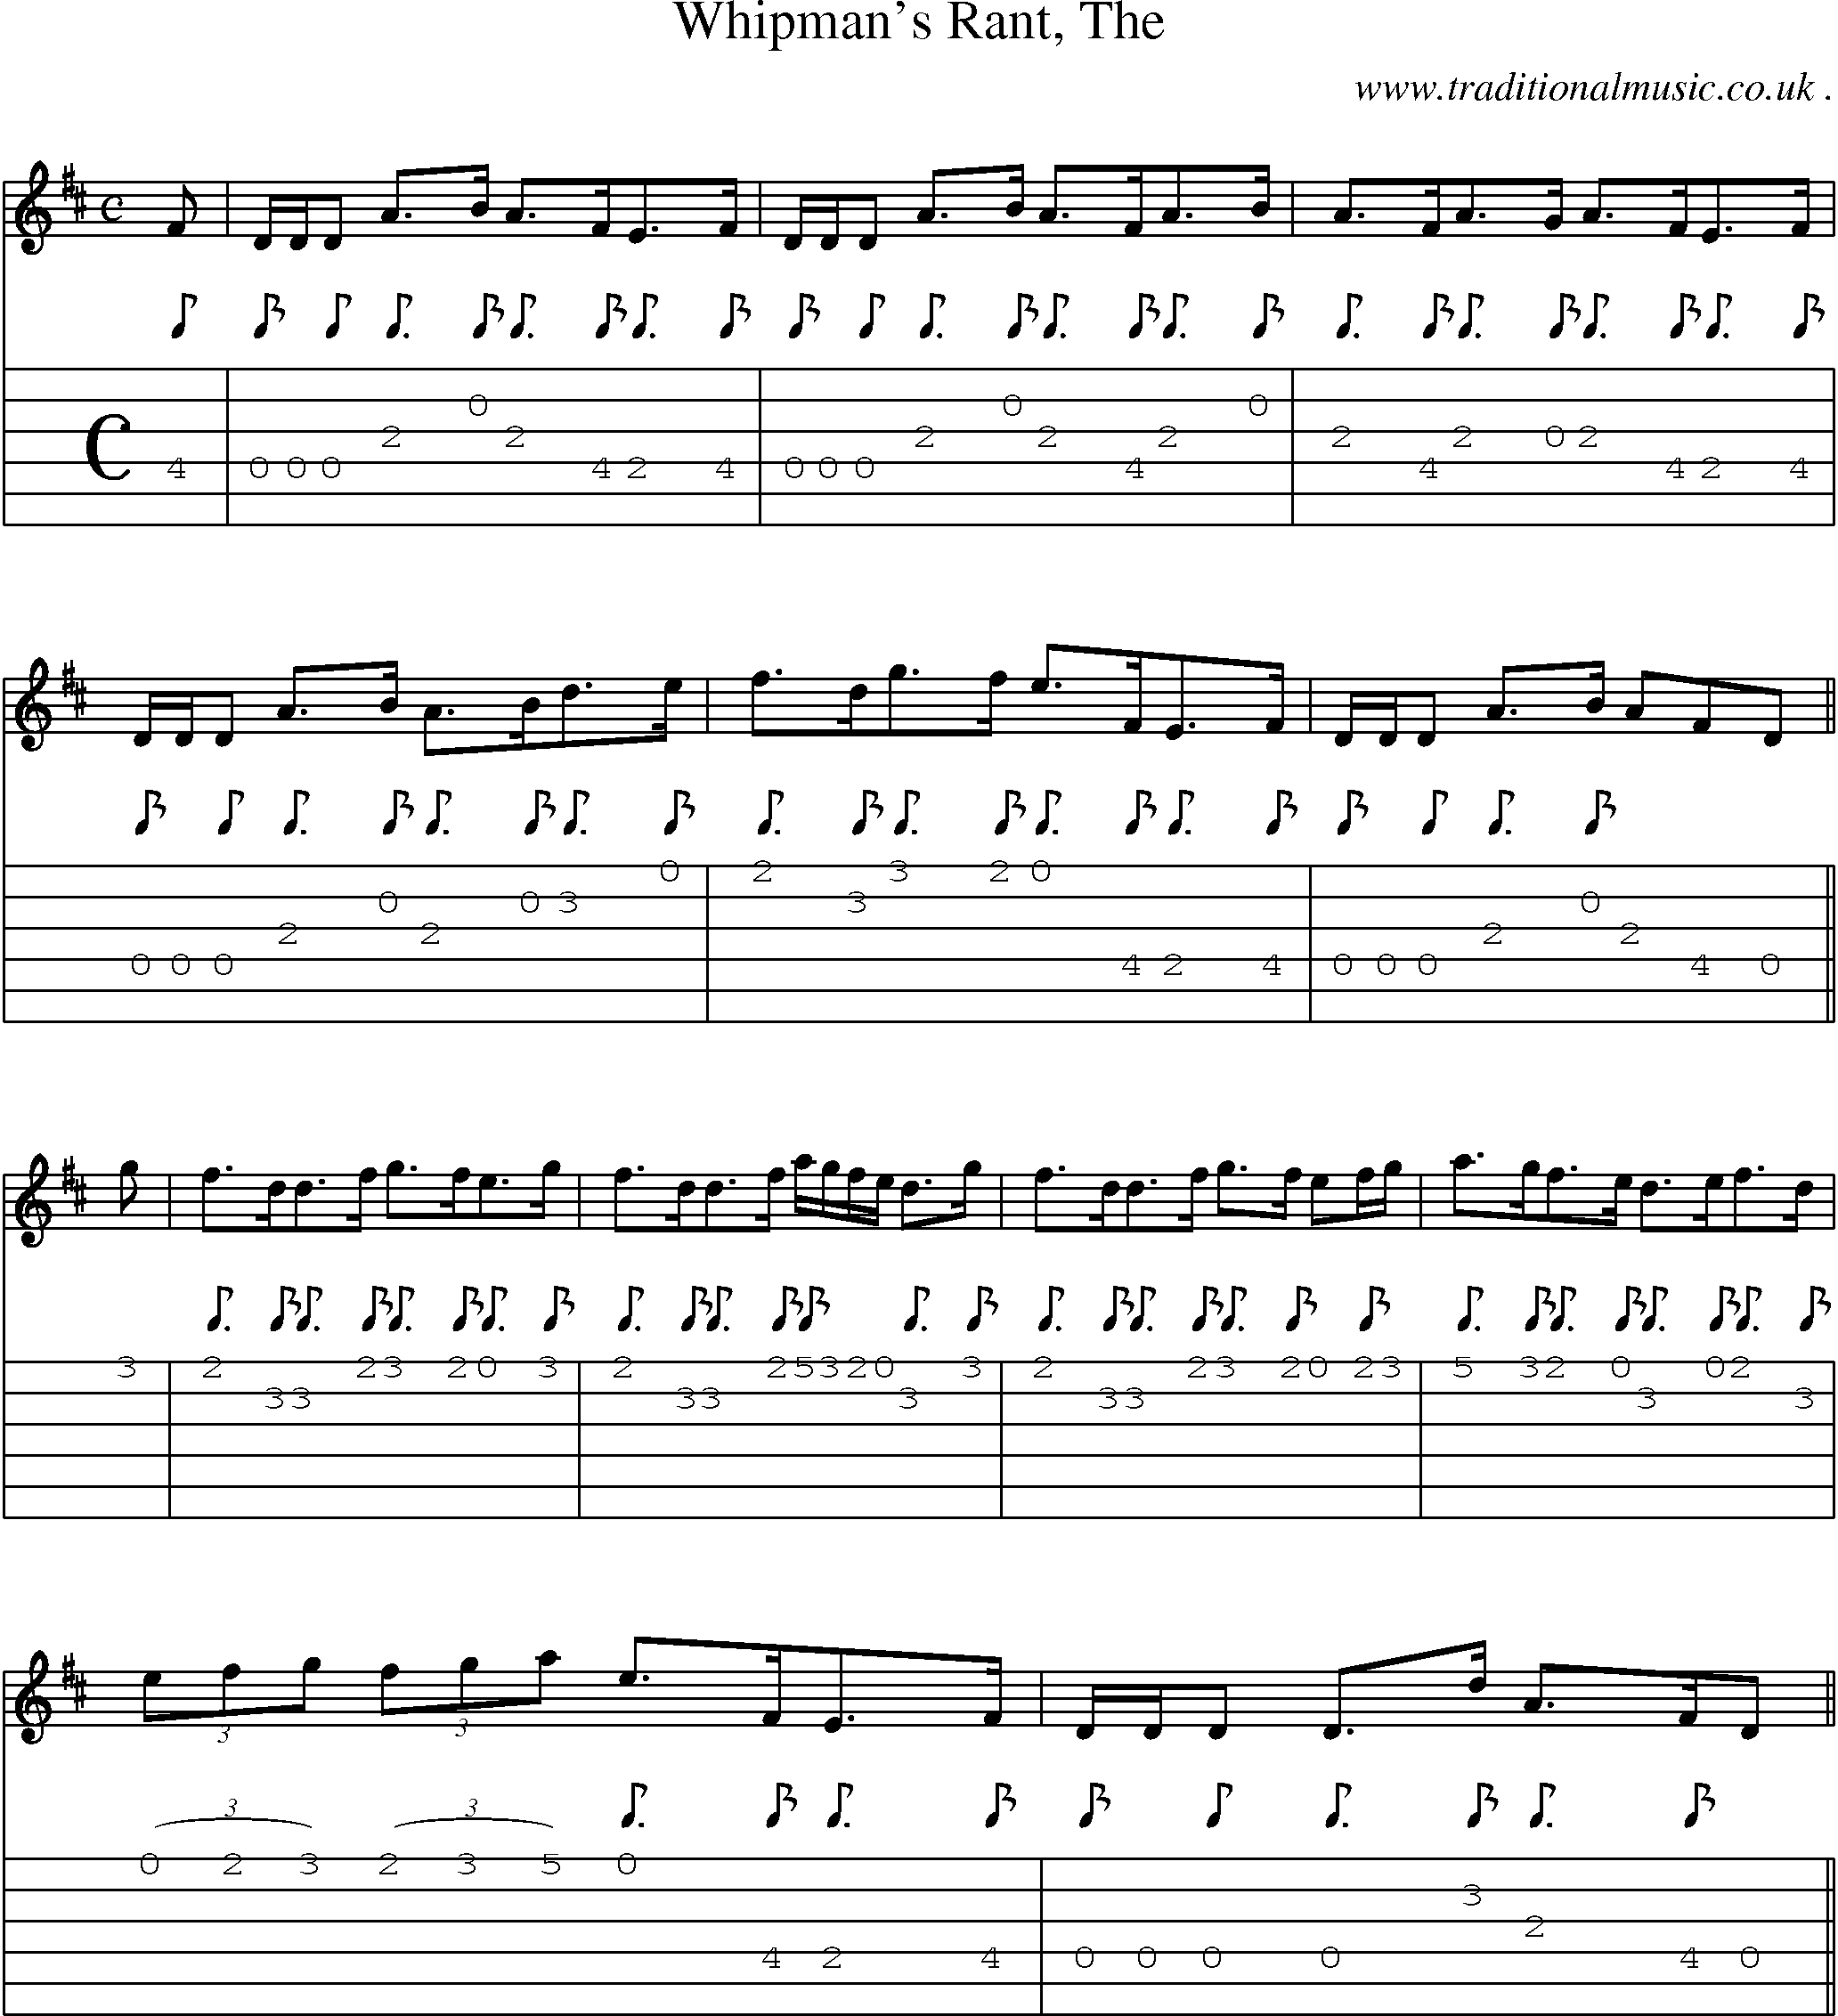 Sheet-music  score, Chords and Guitar Tabs for Whipmans Rant The